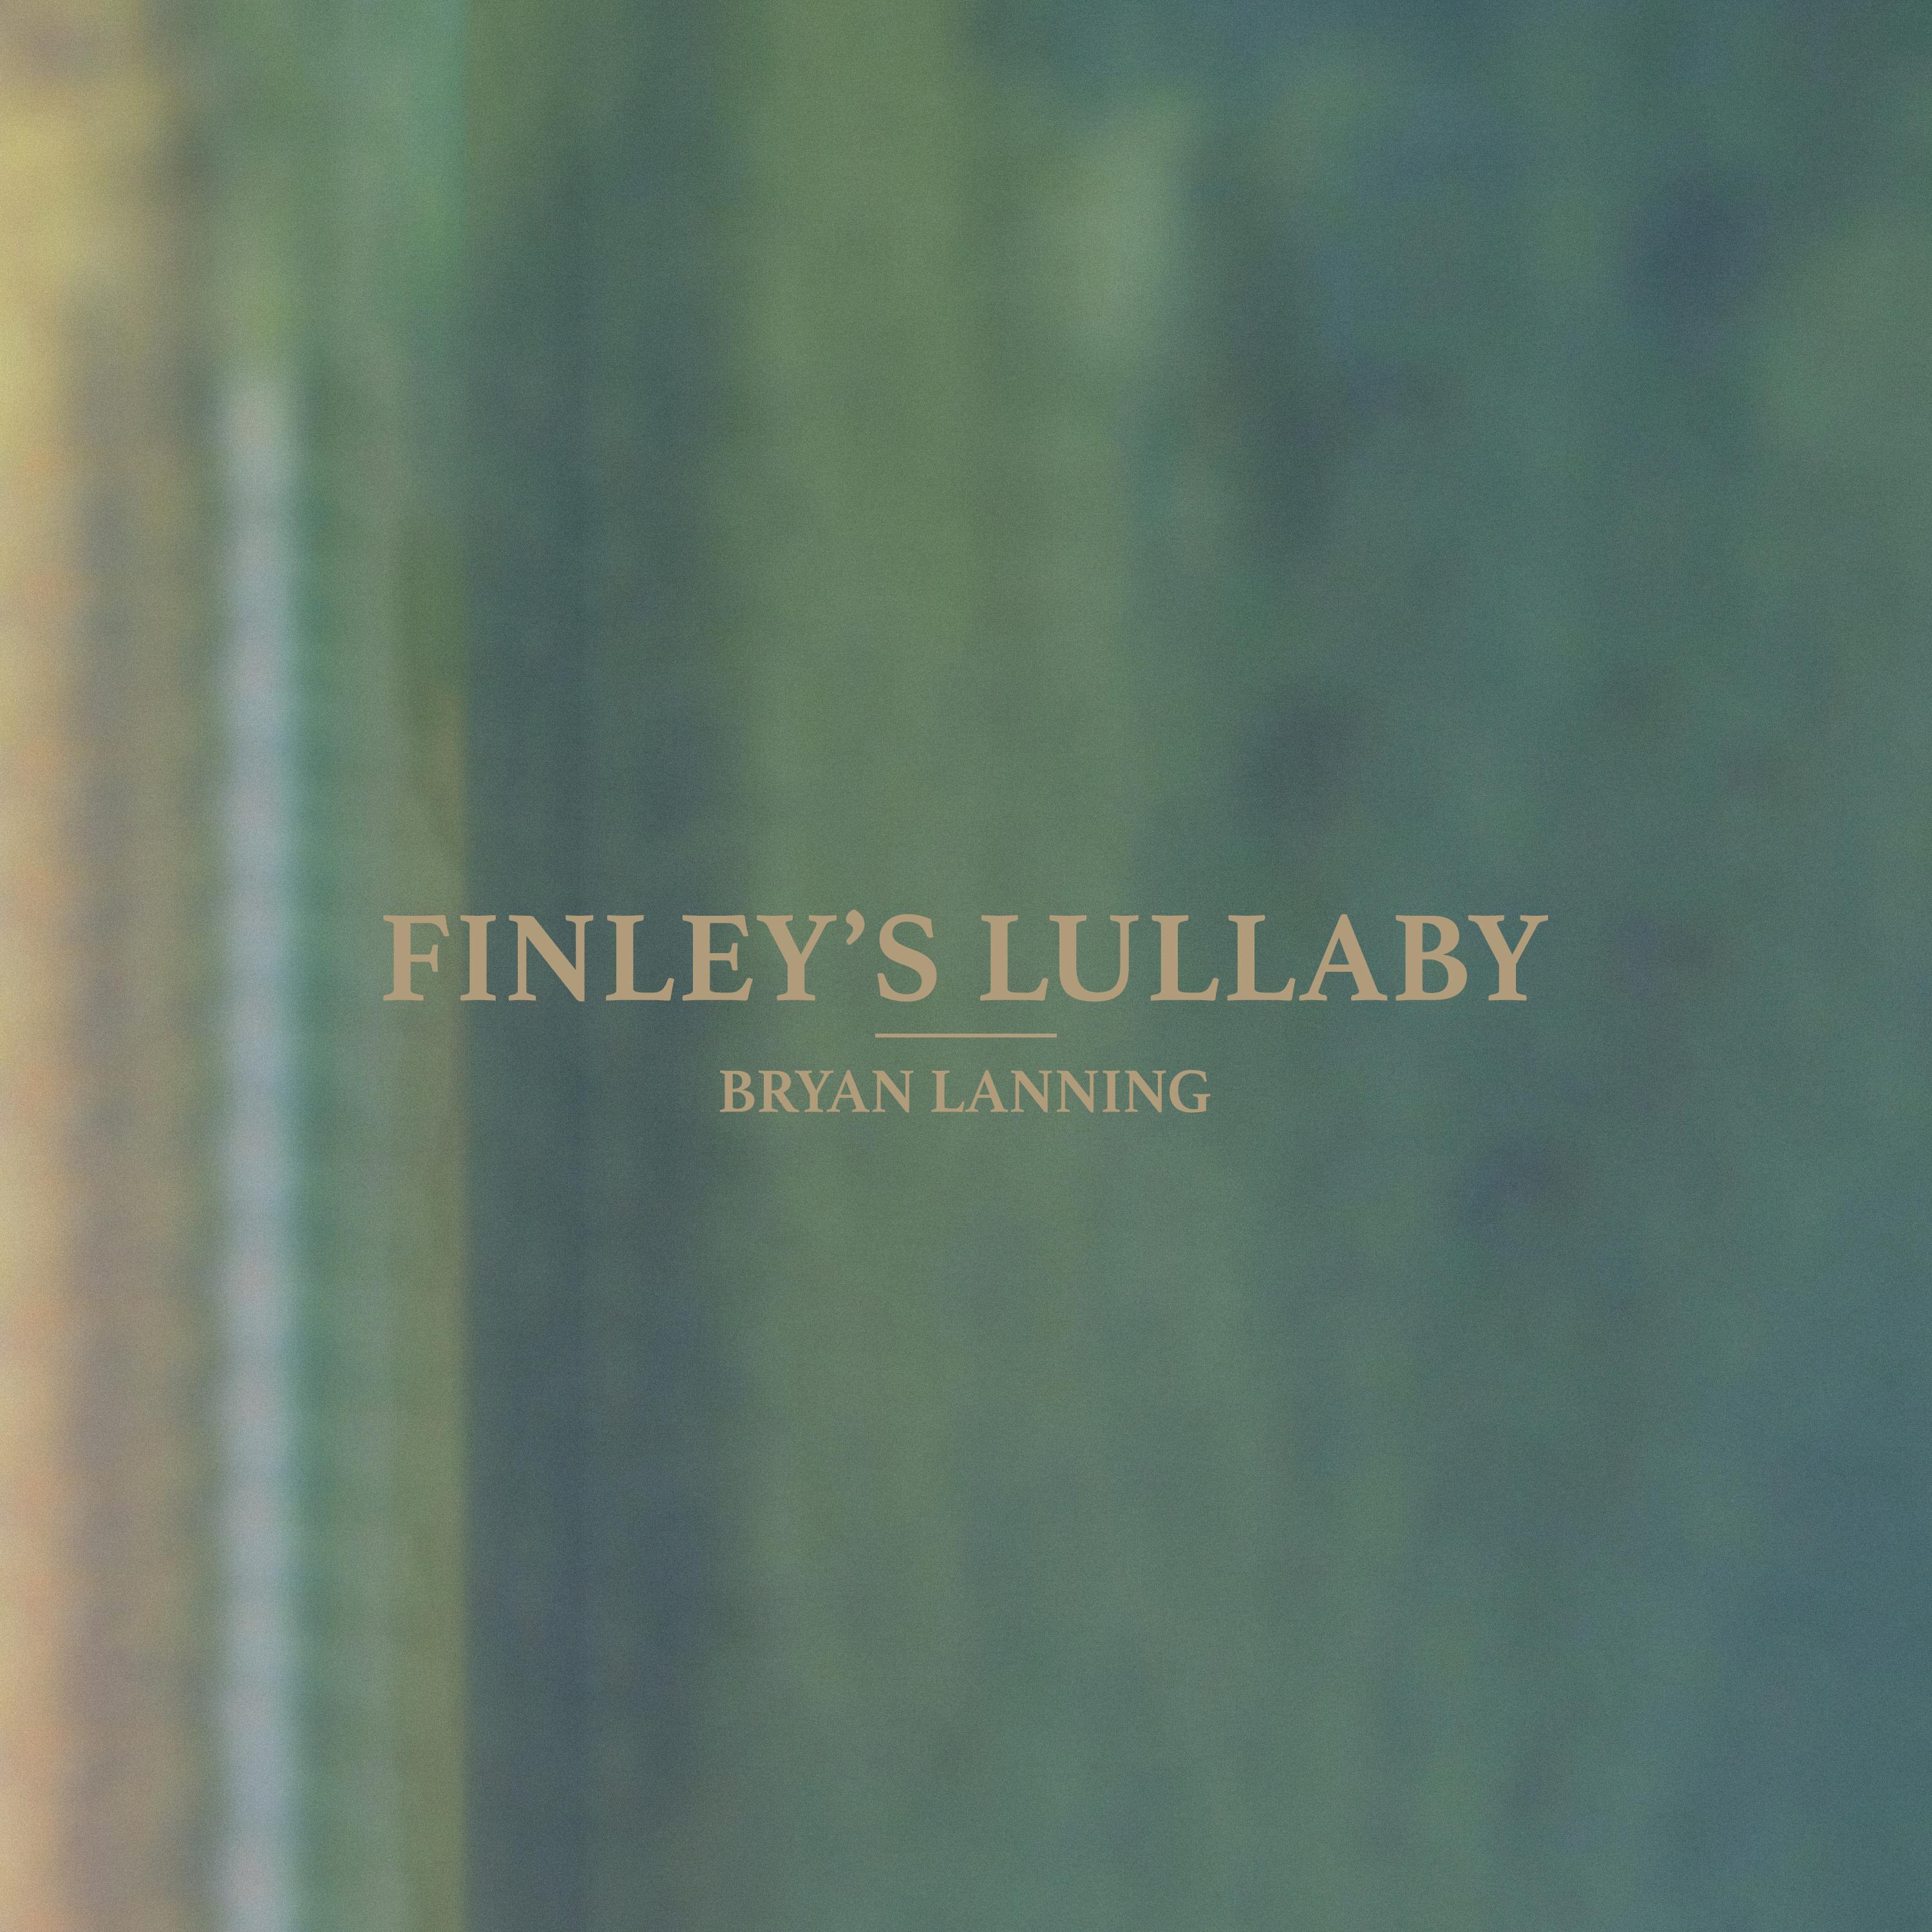 Finley's Lullaby